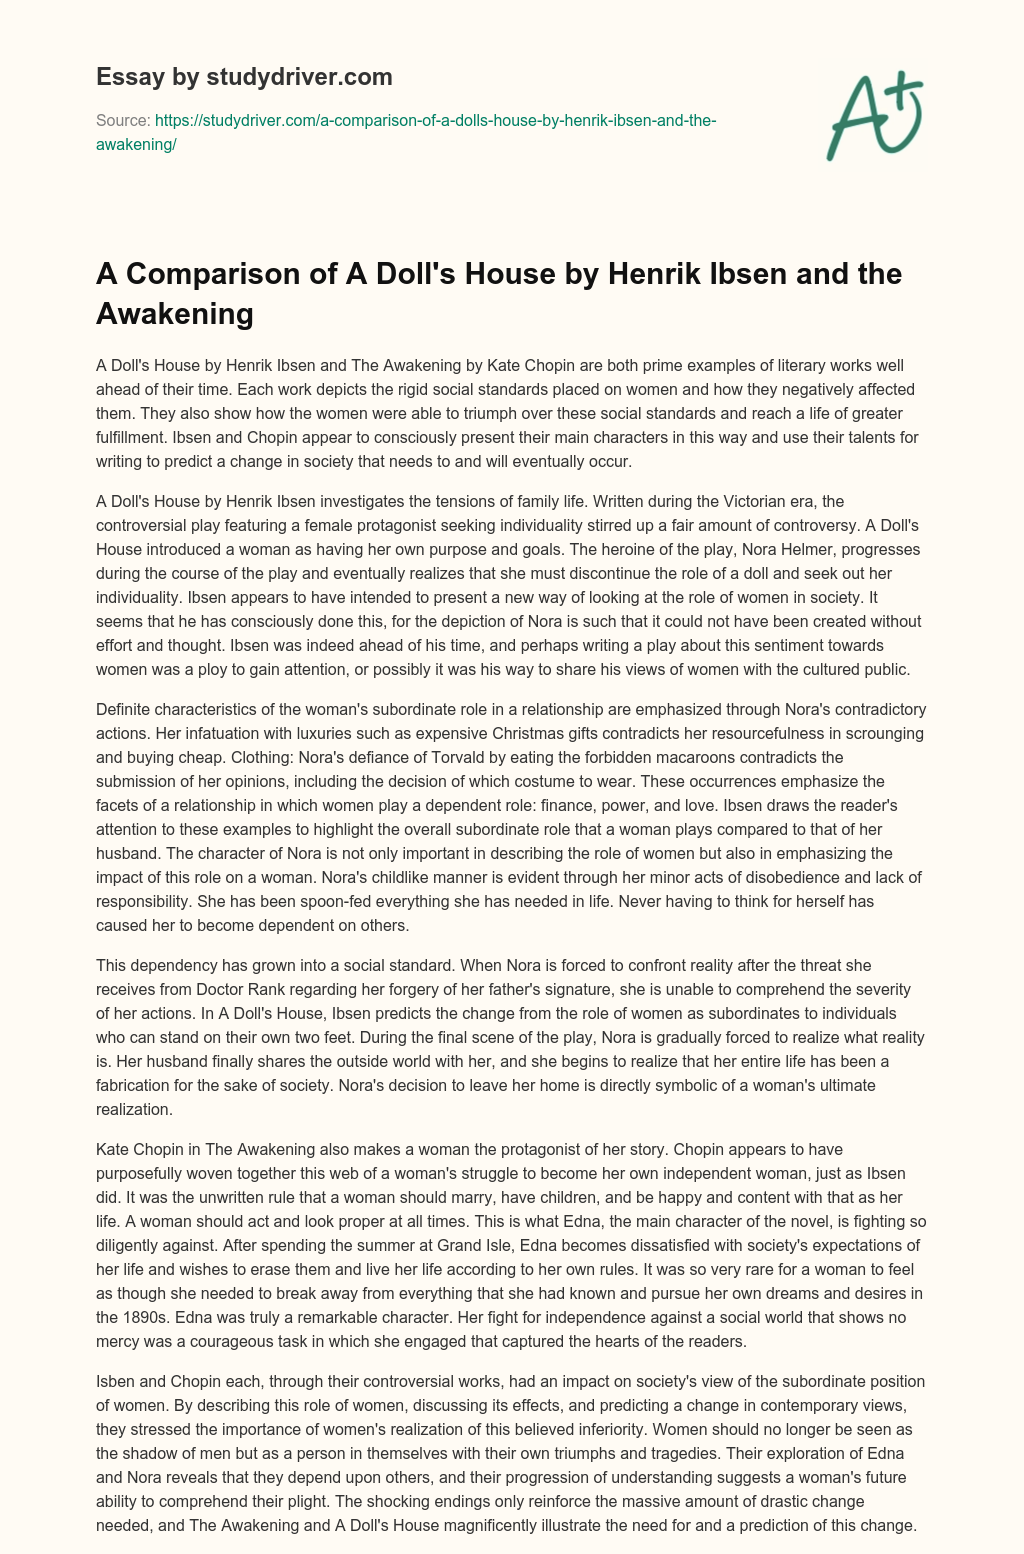 A Comparison of a Doll’s House by Henrik Ibsen and the Awakening essay